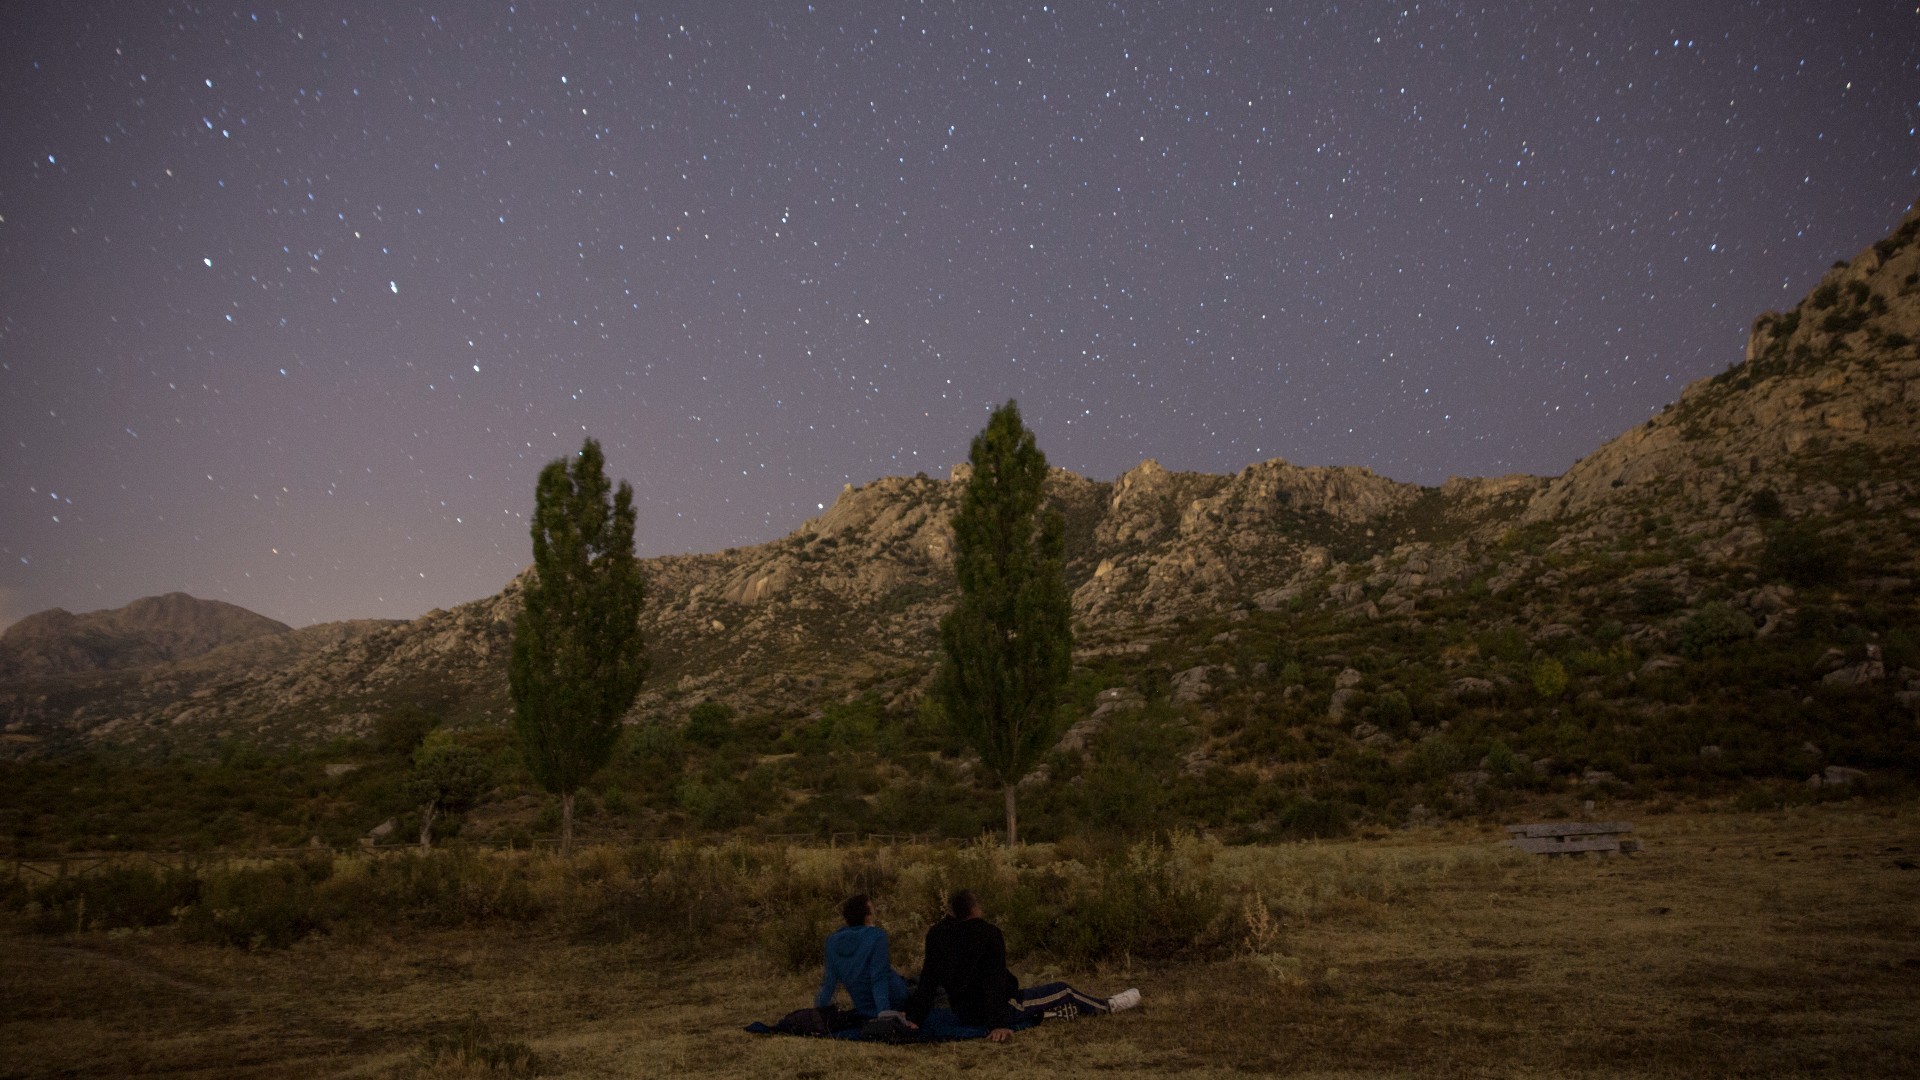 two people sit on a blanket in a field under the stars